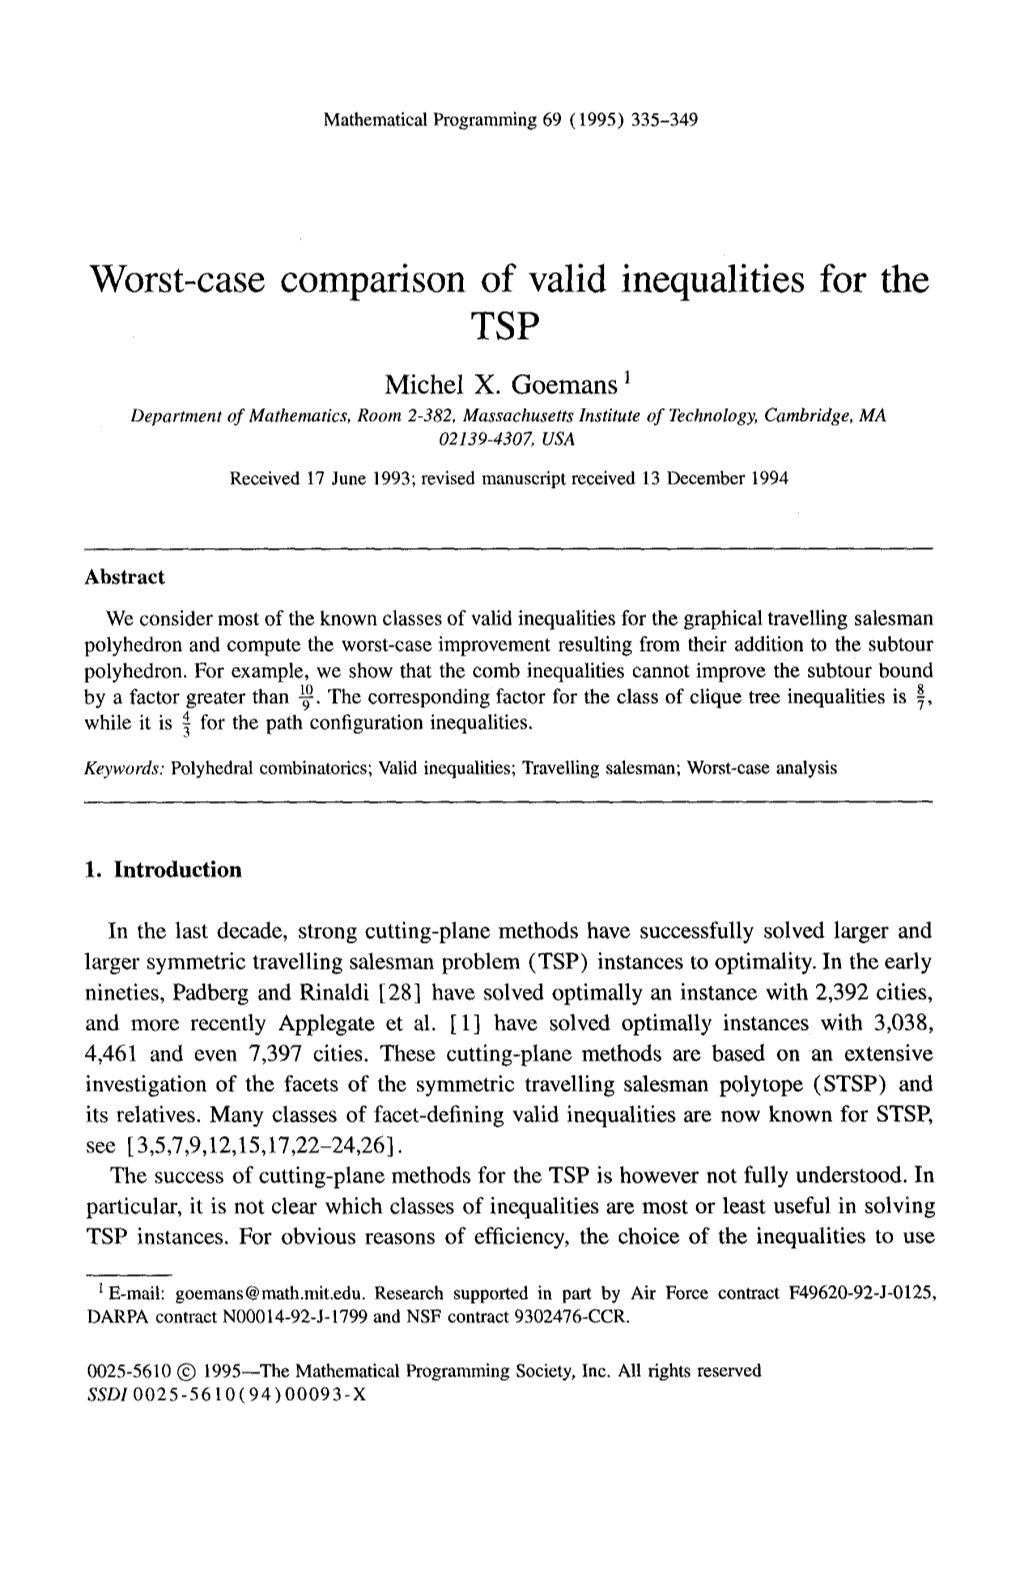 Worst-Case Comparison of Valid Inequalities for the TSP